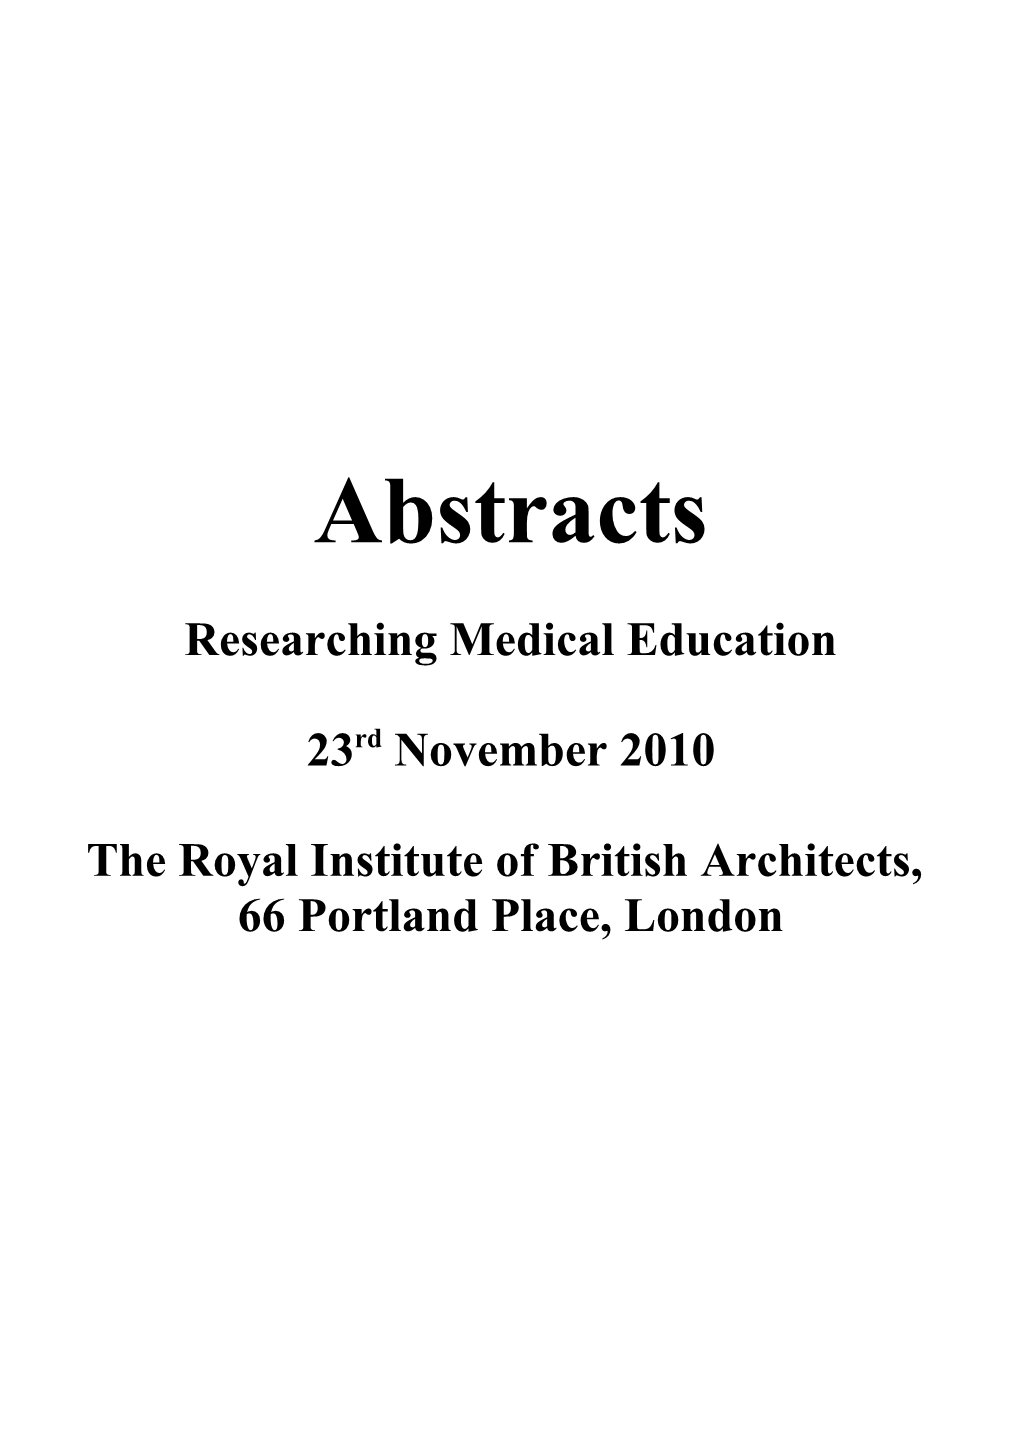 The Royal Institute of British Architects